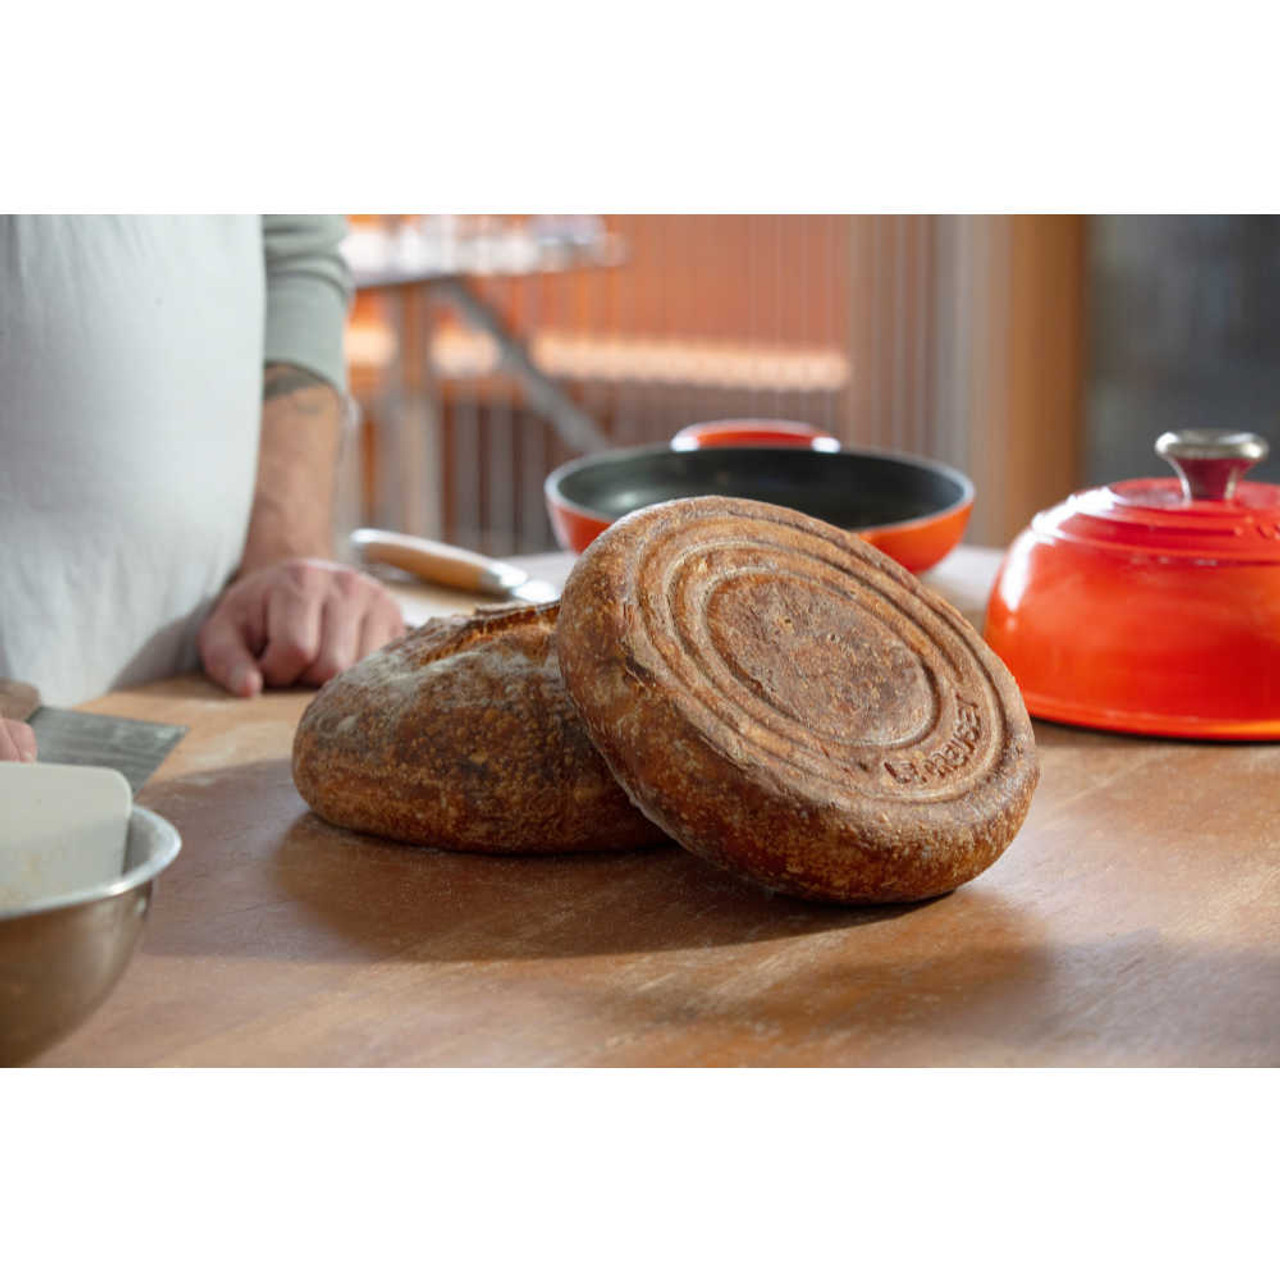 https://cdn11.bigcommerce.com/s-hccytny0od/images/stencil/1280x1280/products/4523/18112/Le_Creuset_Cast_Iron_Bread_Oven__03203.1646885727.jpg?c=2?imbypass=on